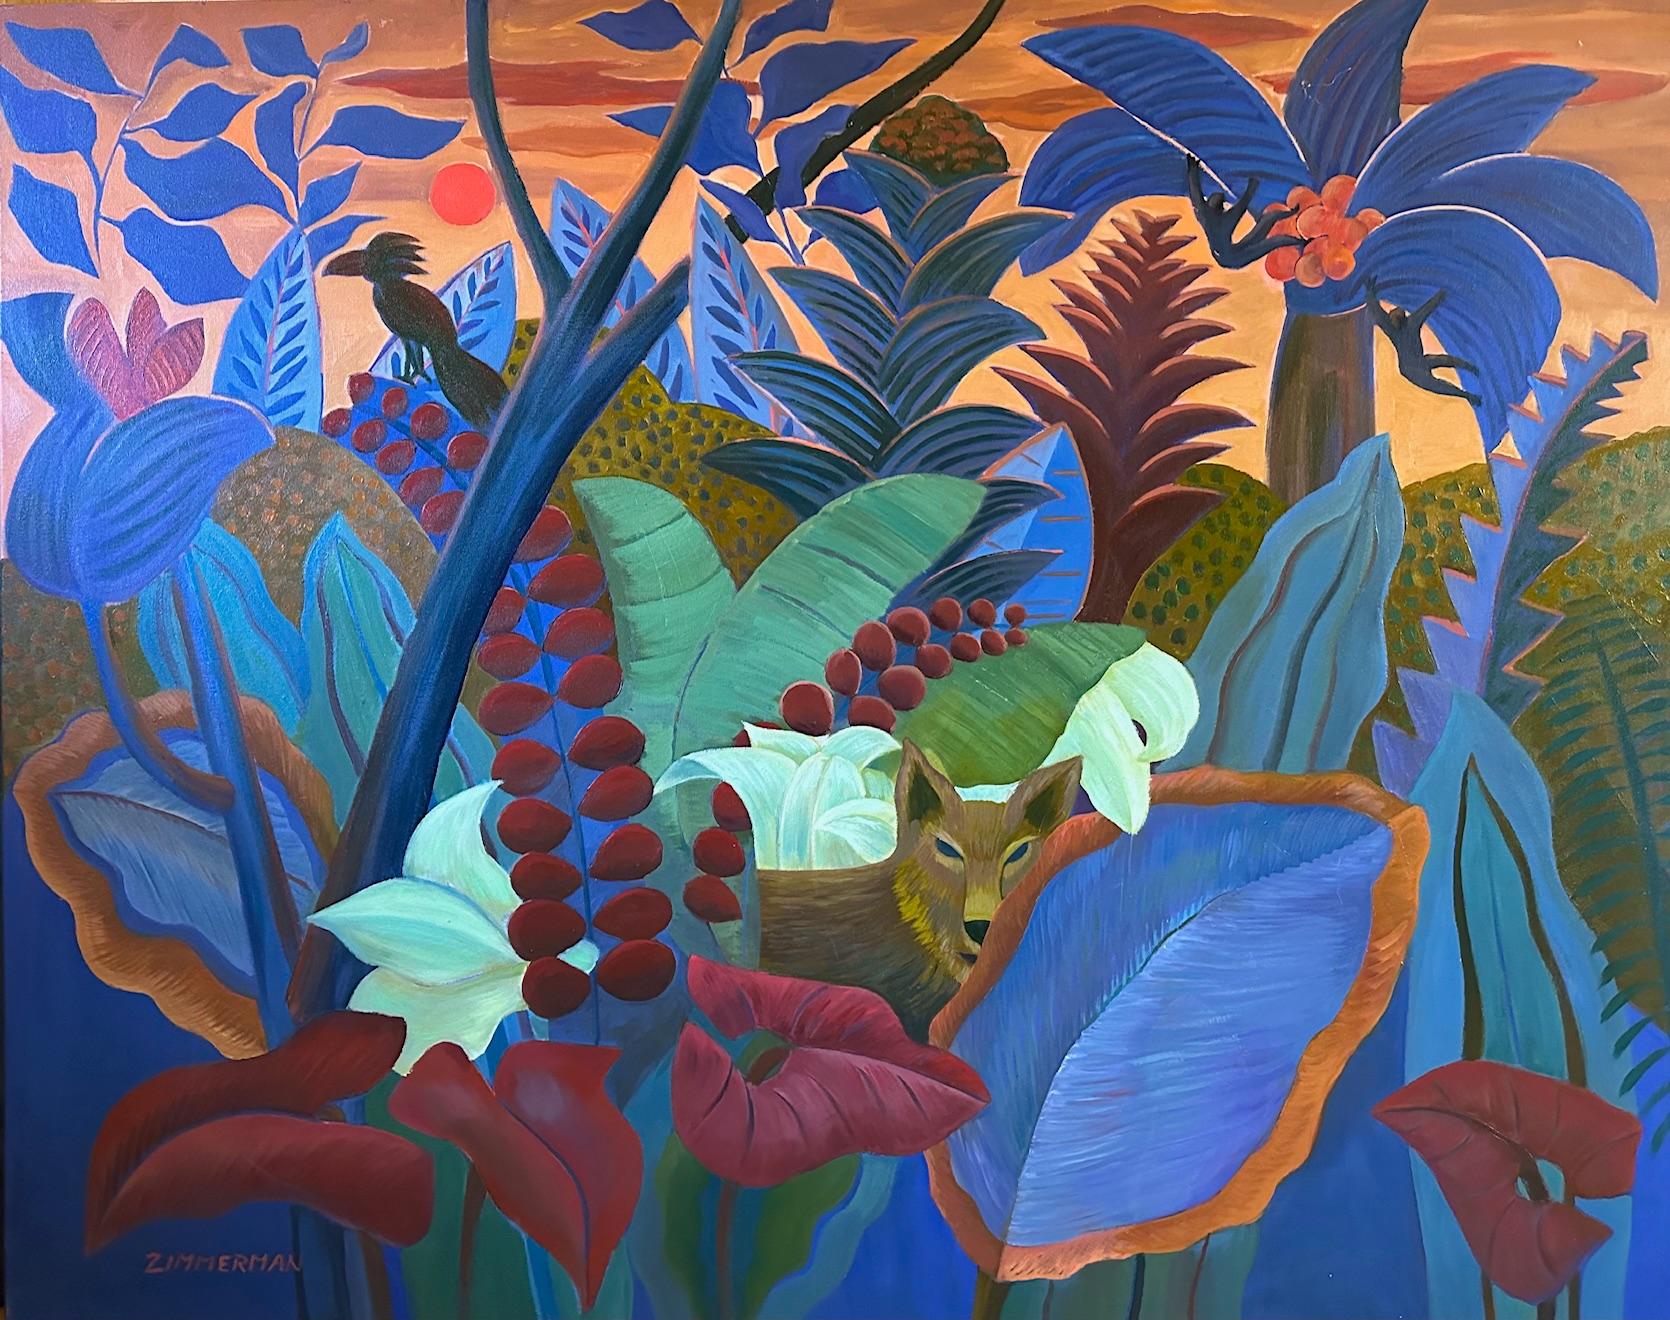 Woven Jungle - Landscape Nature Painting With Animals By Marc Zimmerman

This masterwork is exhibited in the Zimmerman Gallery, Carmel CA.


Marc Zimmerman creates playful paintings, whether deep mysterious jungle or delightfully whimsical florals.